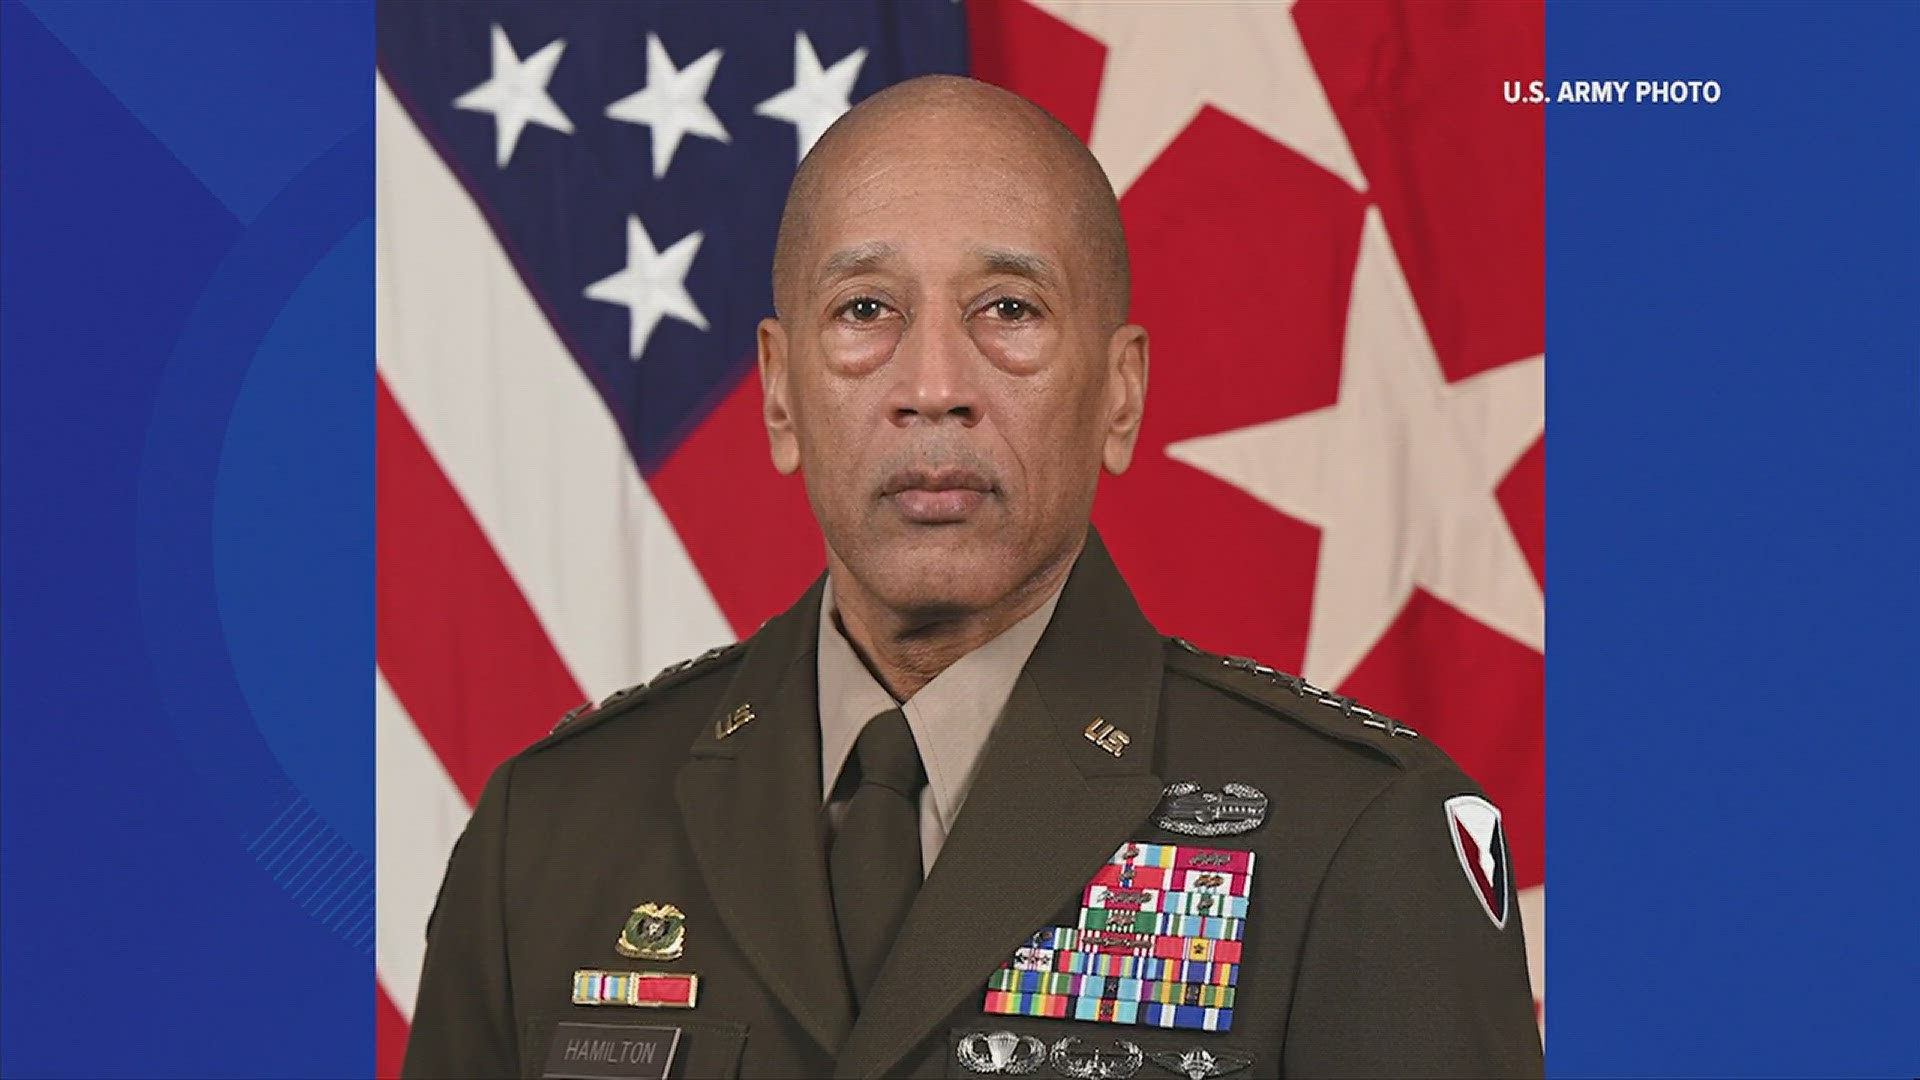 Officials say the four-star general interfered with the assessment process of a subordinate applying for a command position.